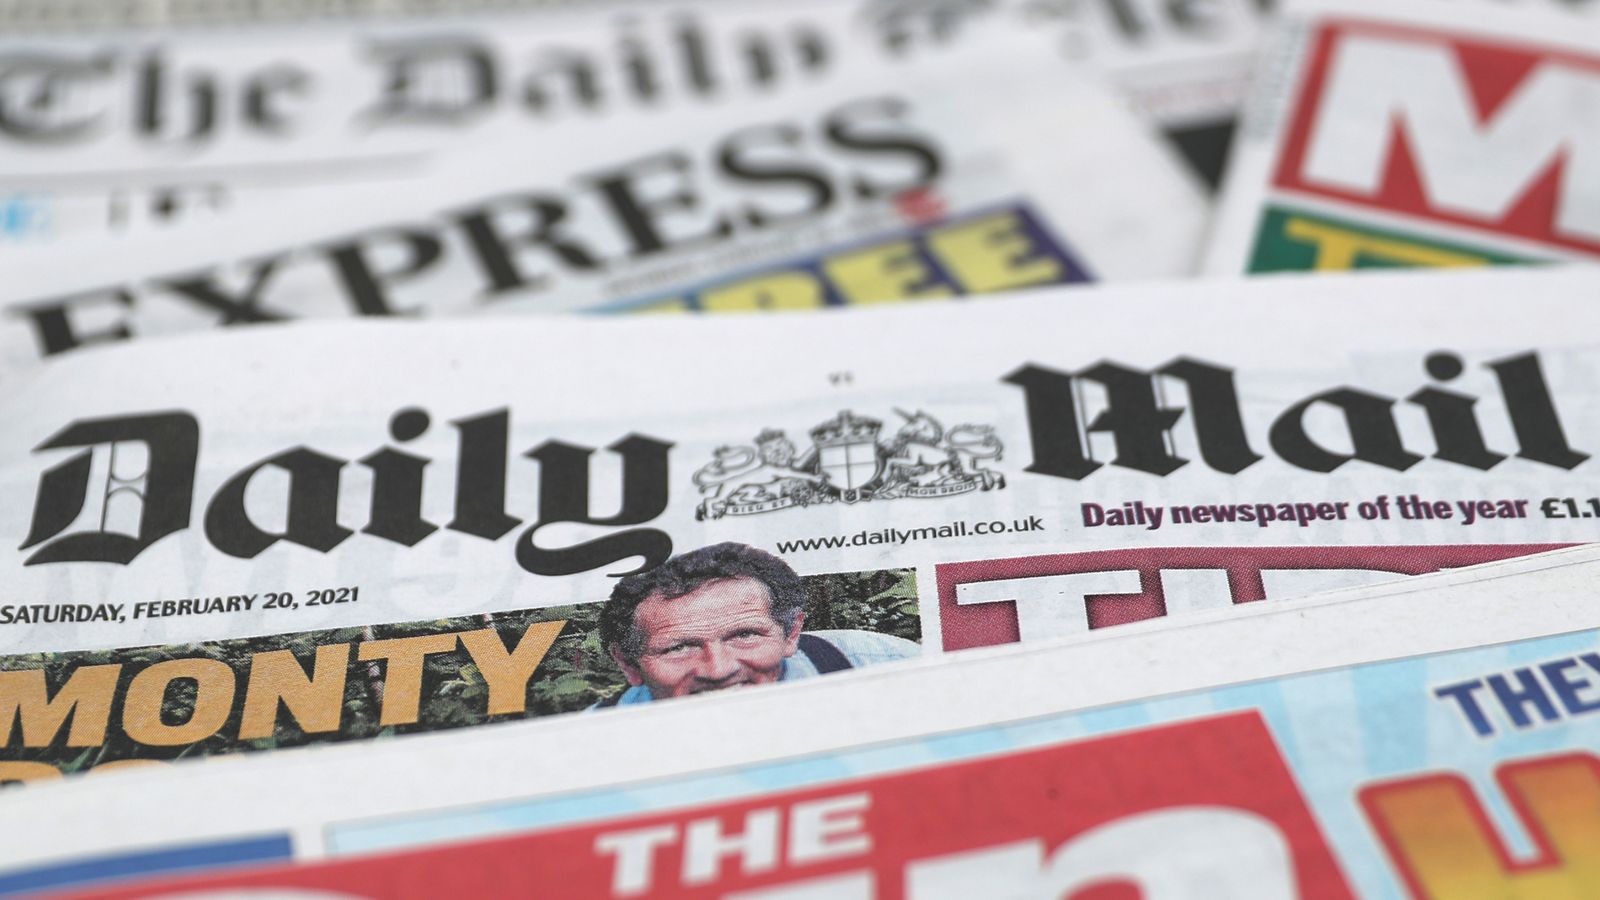 Lord Rothermere raises offer for Daily Mail owner after investor backlash